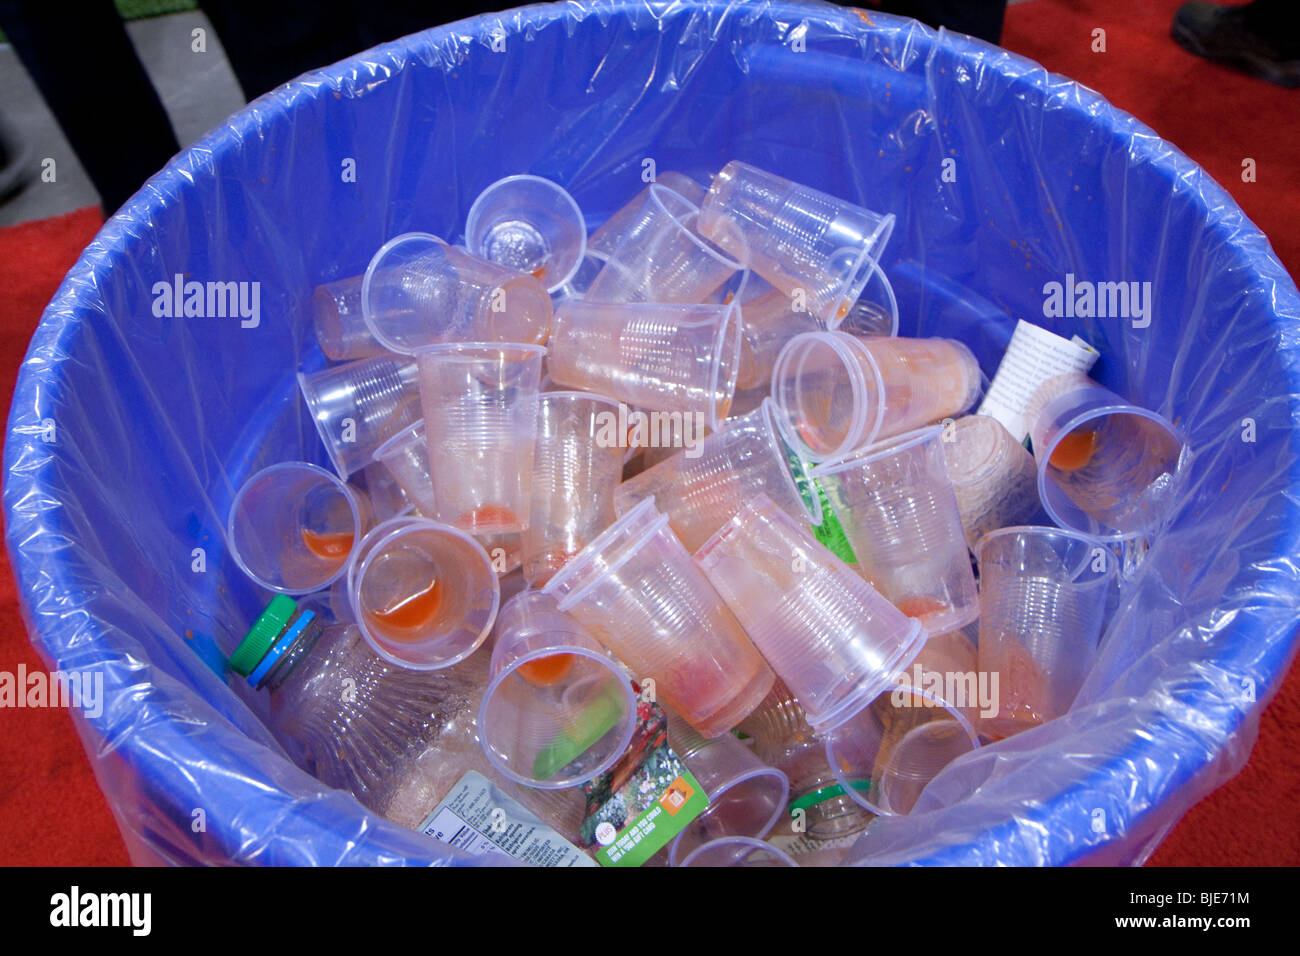 Blue recycling bin full of empty plastic cups to help save the environment Stock Photo